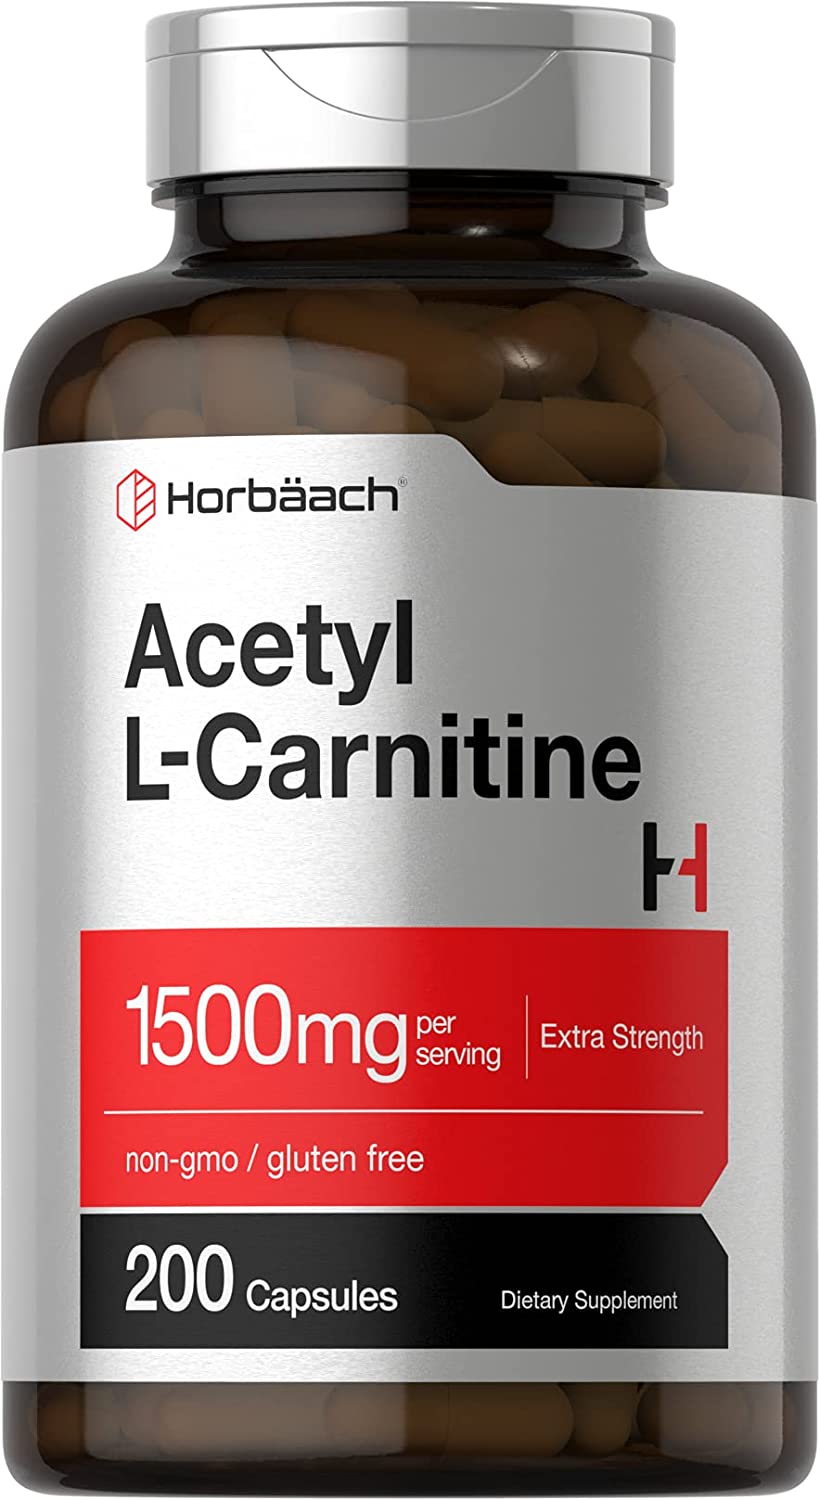 Horbaach Acetyl L-Carnitine 1500 mg Non-GMO, Gluten Free Supplement - 200 Capsules